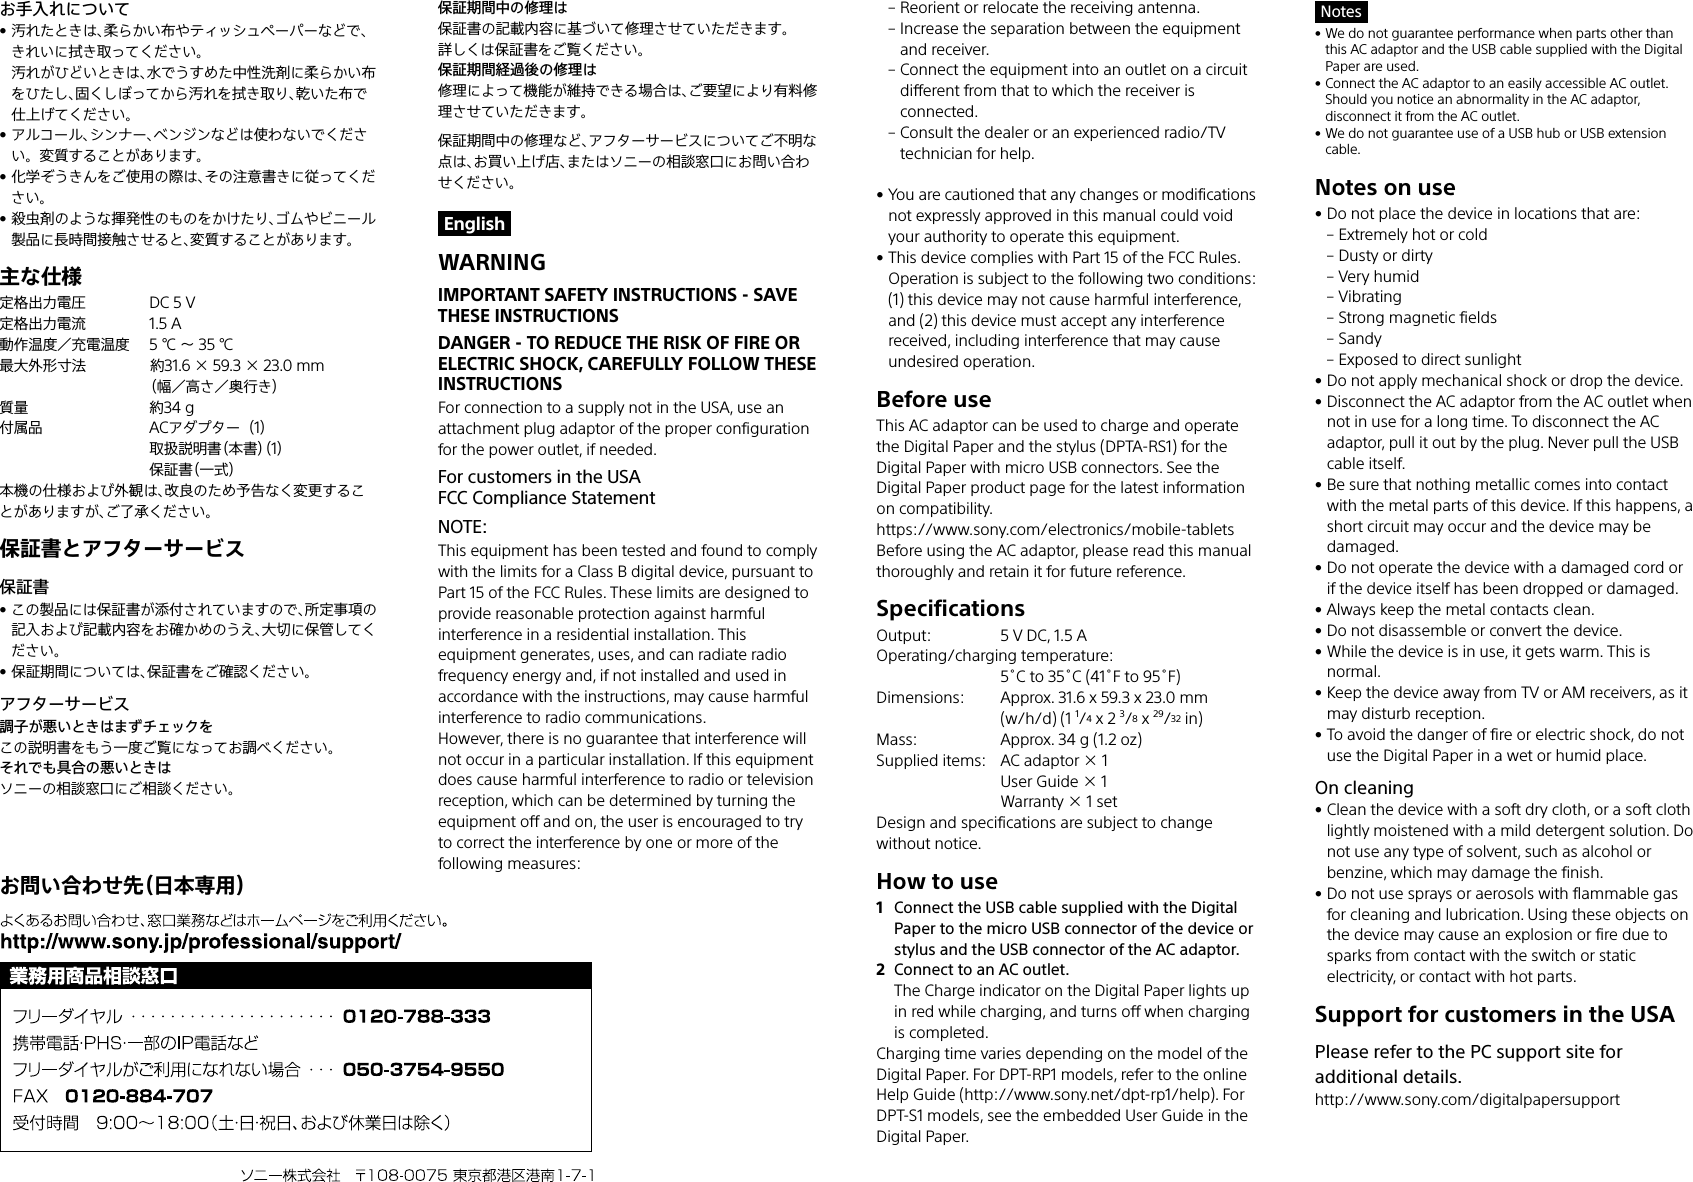 Page 2 of 2 - Sony AC-UUD12 User Manual Guide 4684881111